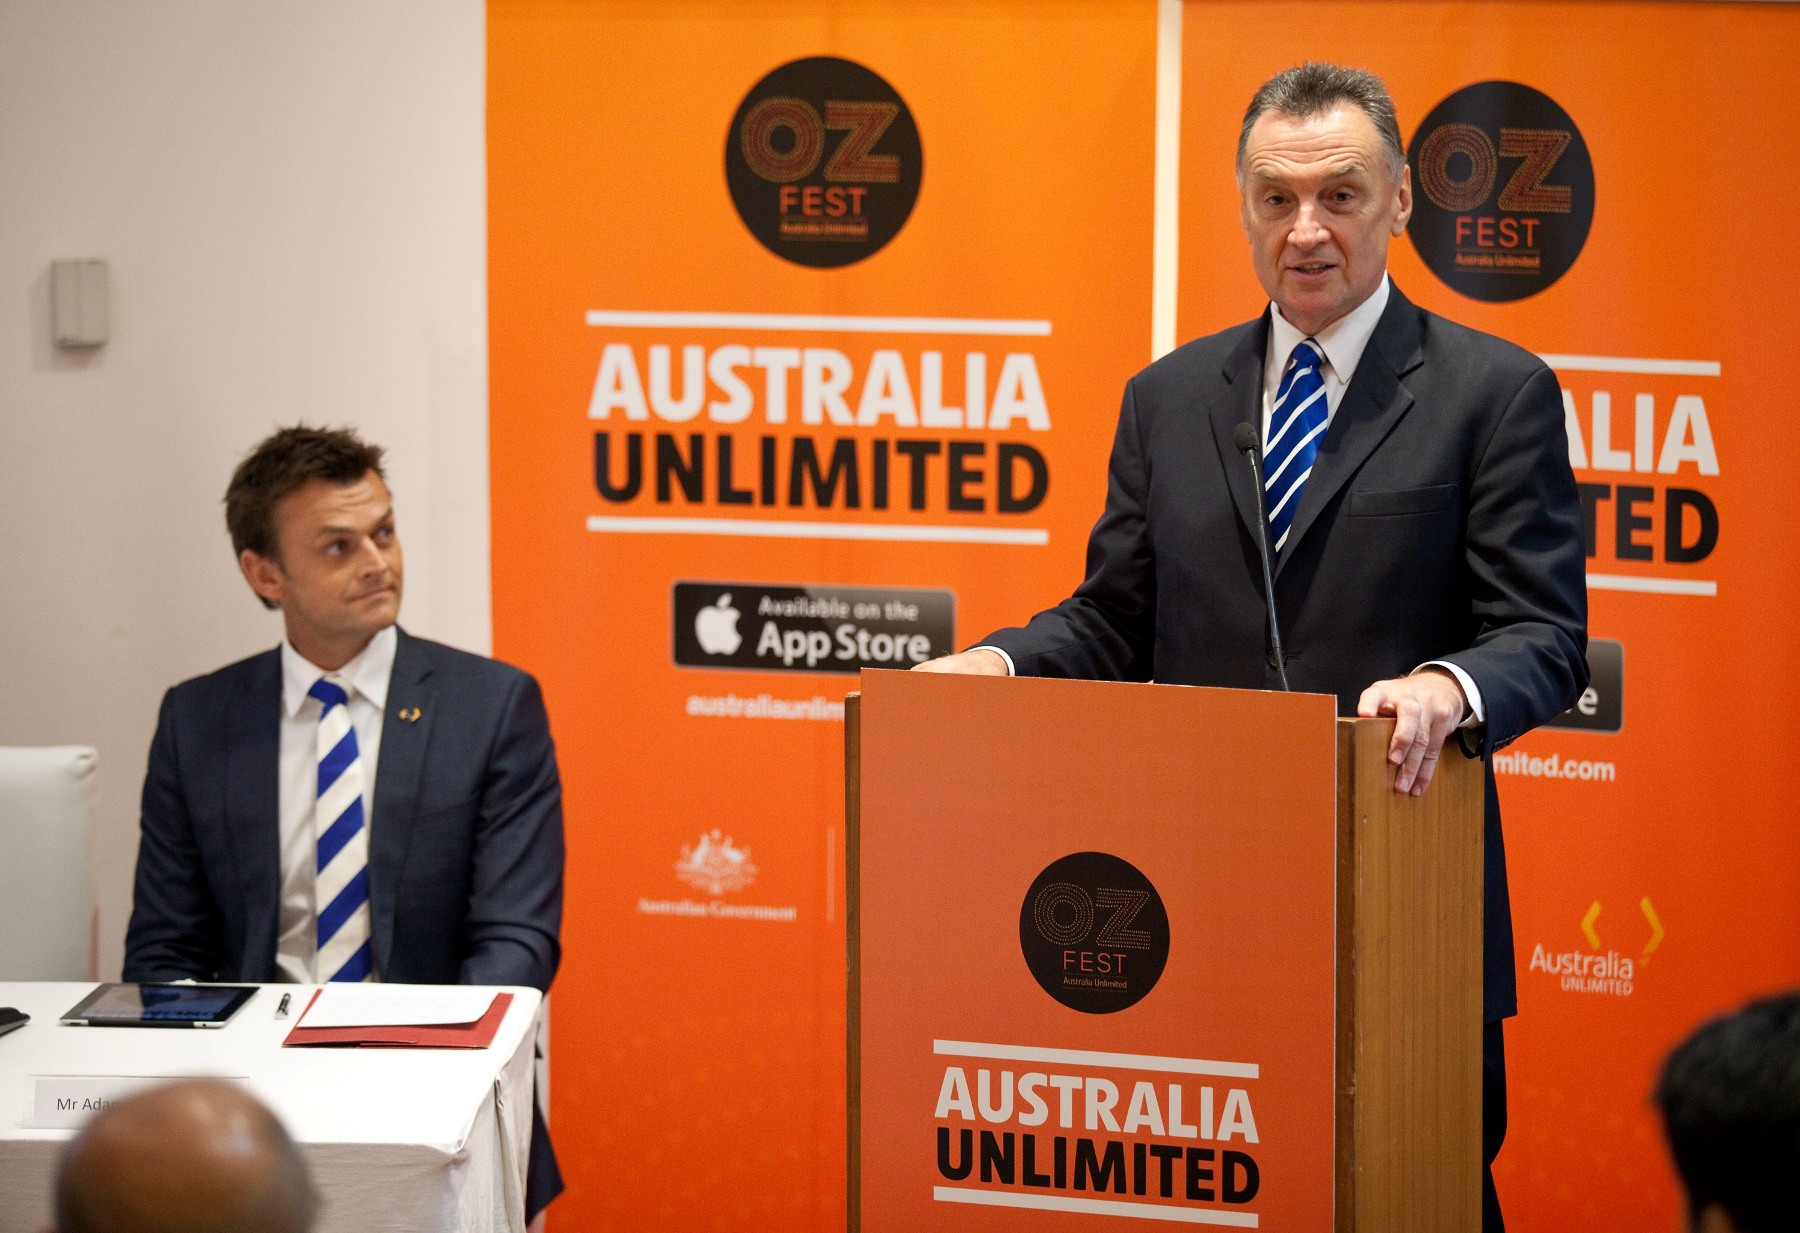 Adam Gilchrist & Hon Dr Craig Emerson at the launch of Australia Unlimited 2